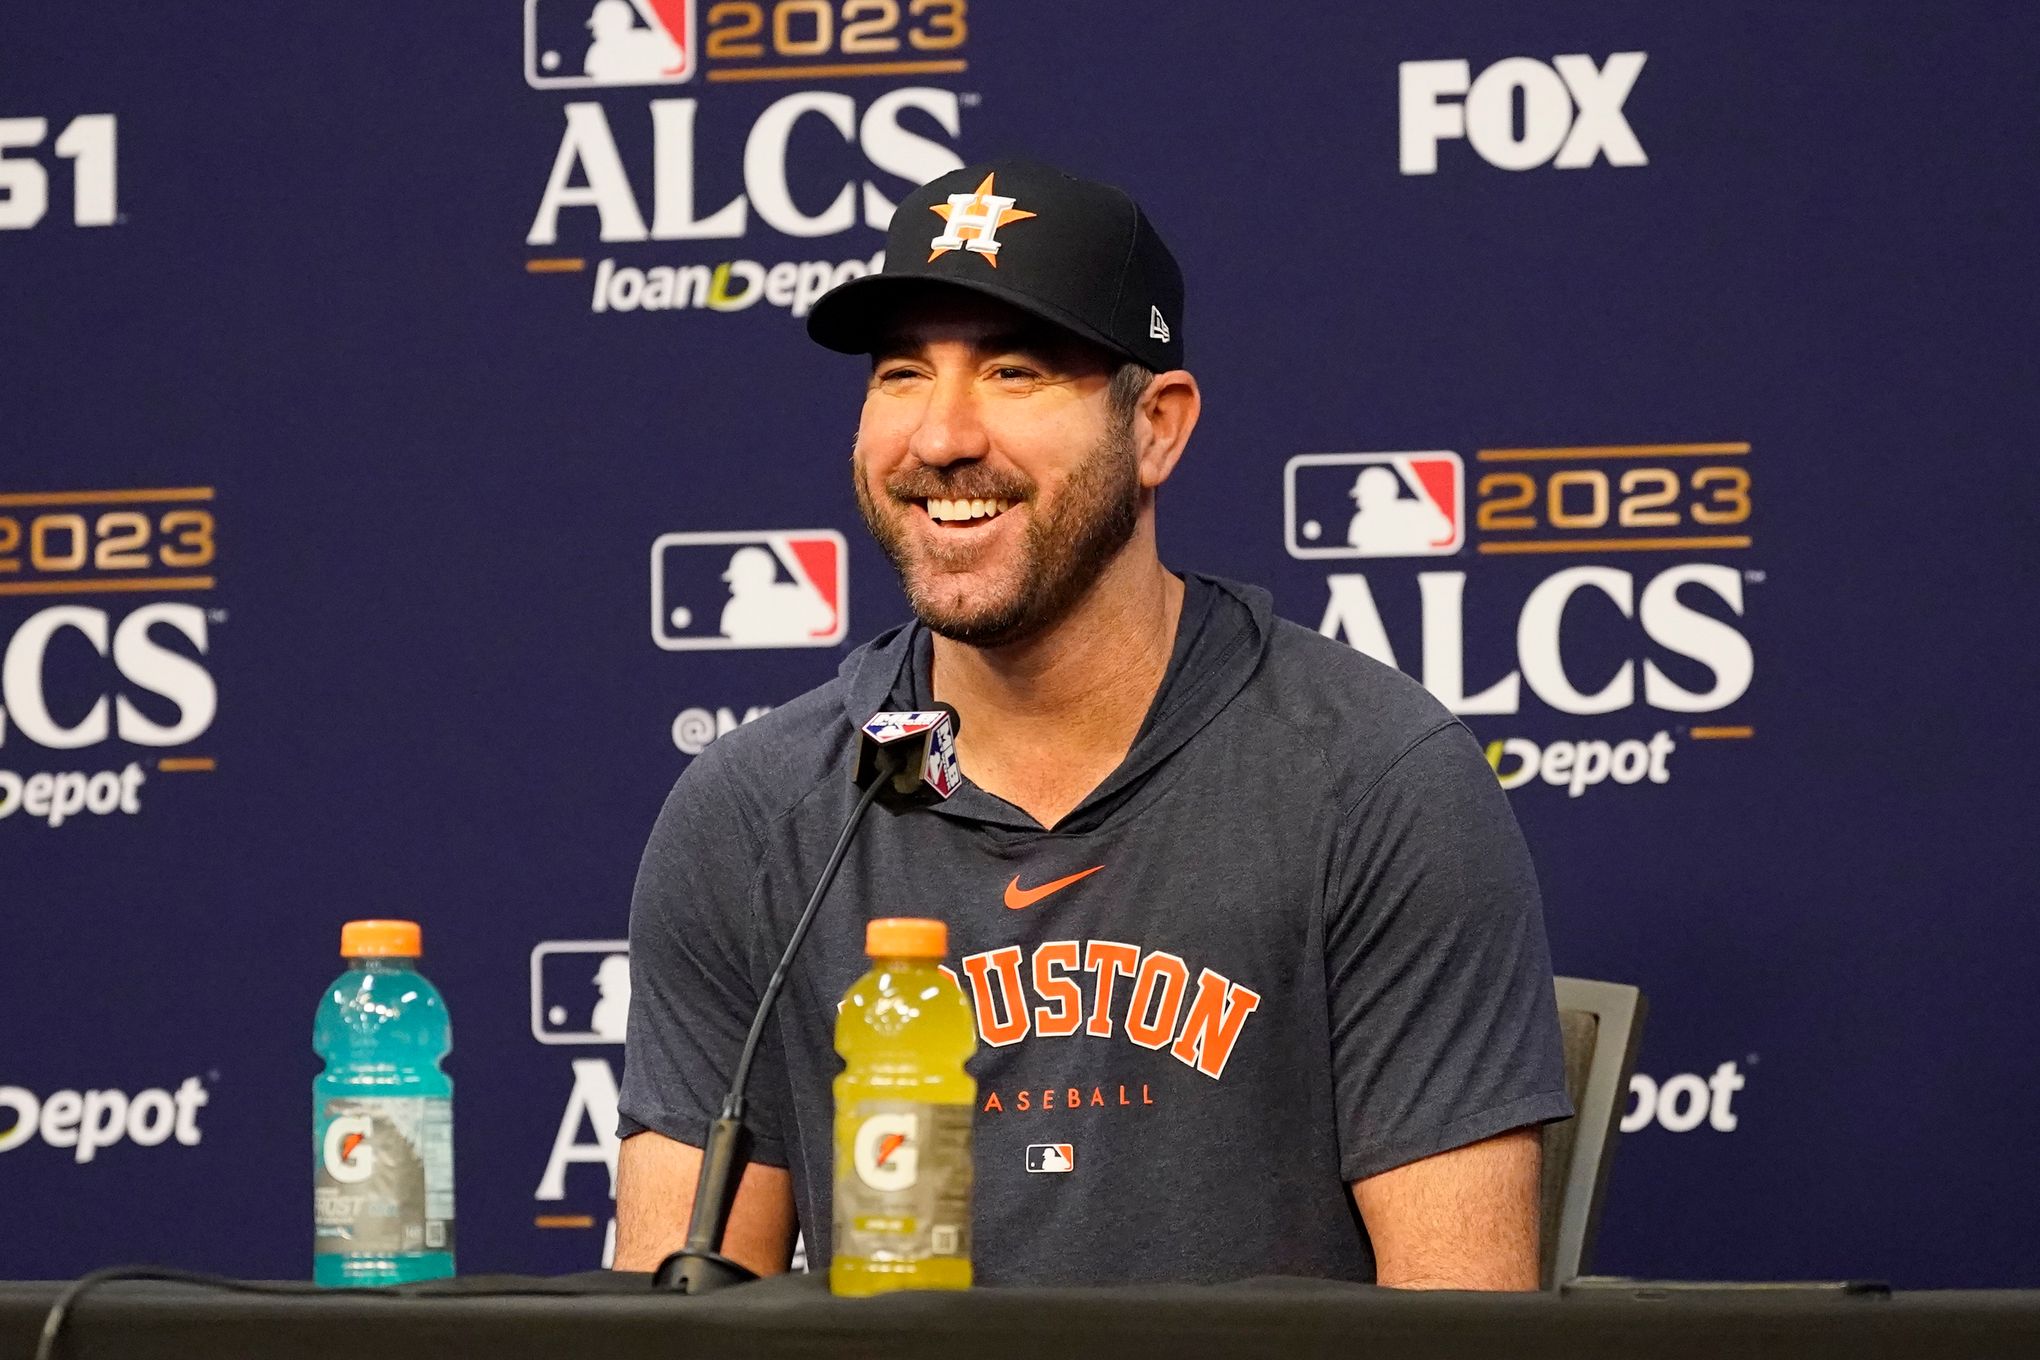 Astros Josh on X: If the Houston Astros re-acquire Justin Verlander, I  will buy someone who retweets this tweet and follows my account an Astros  Verlander jersey.  / X